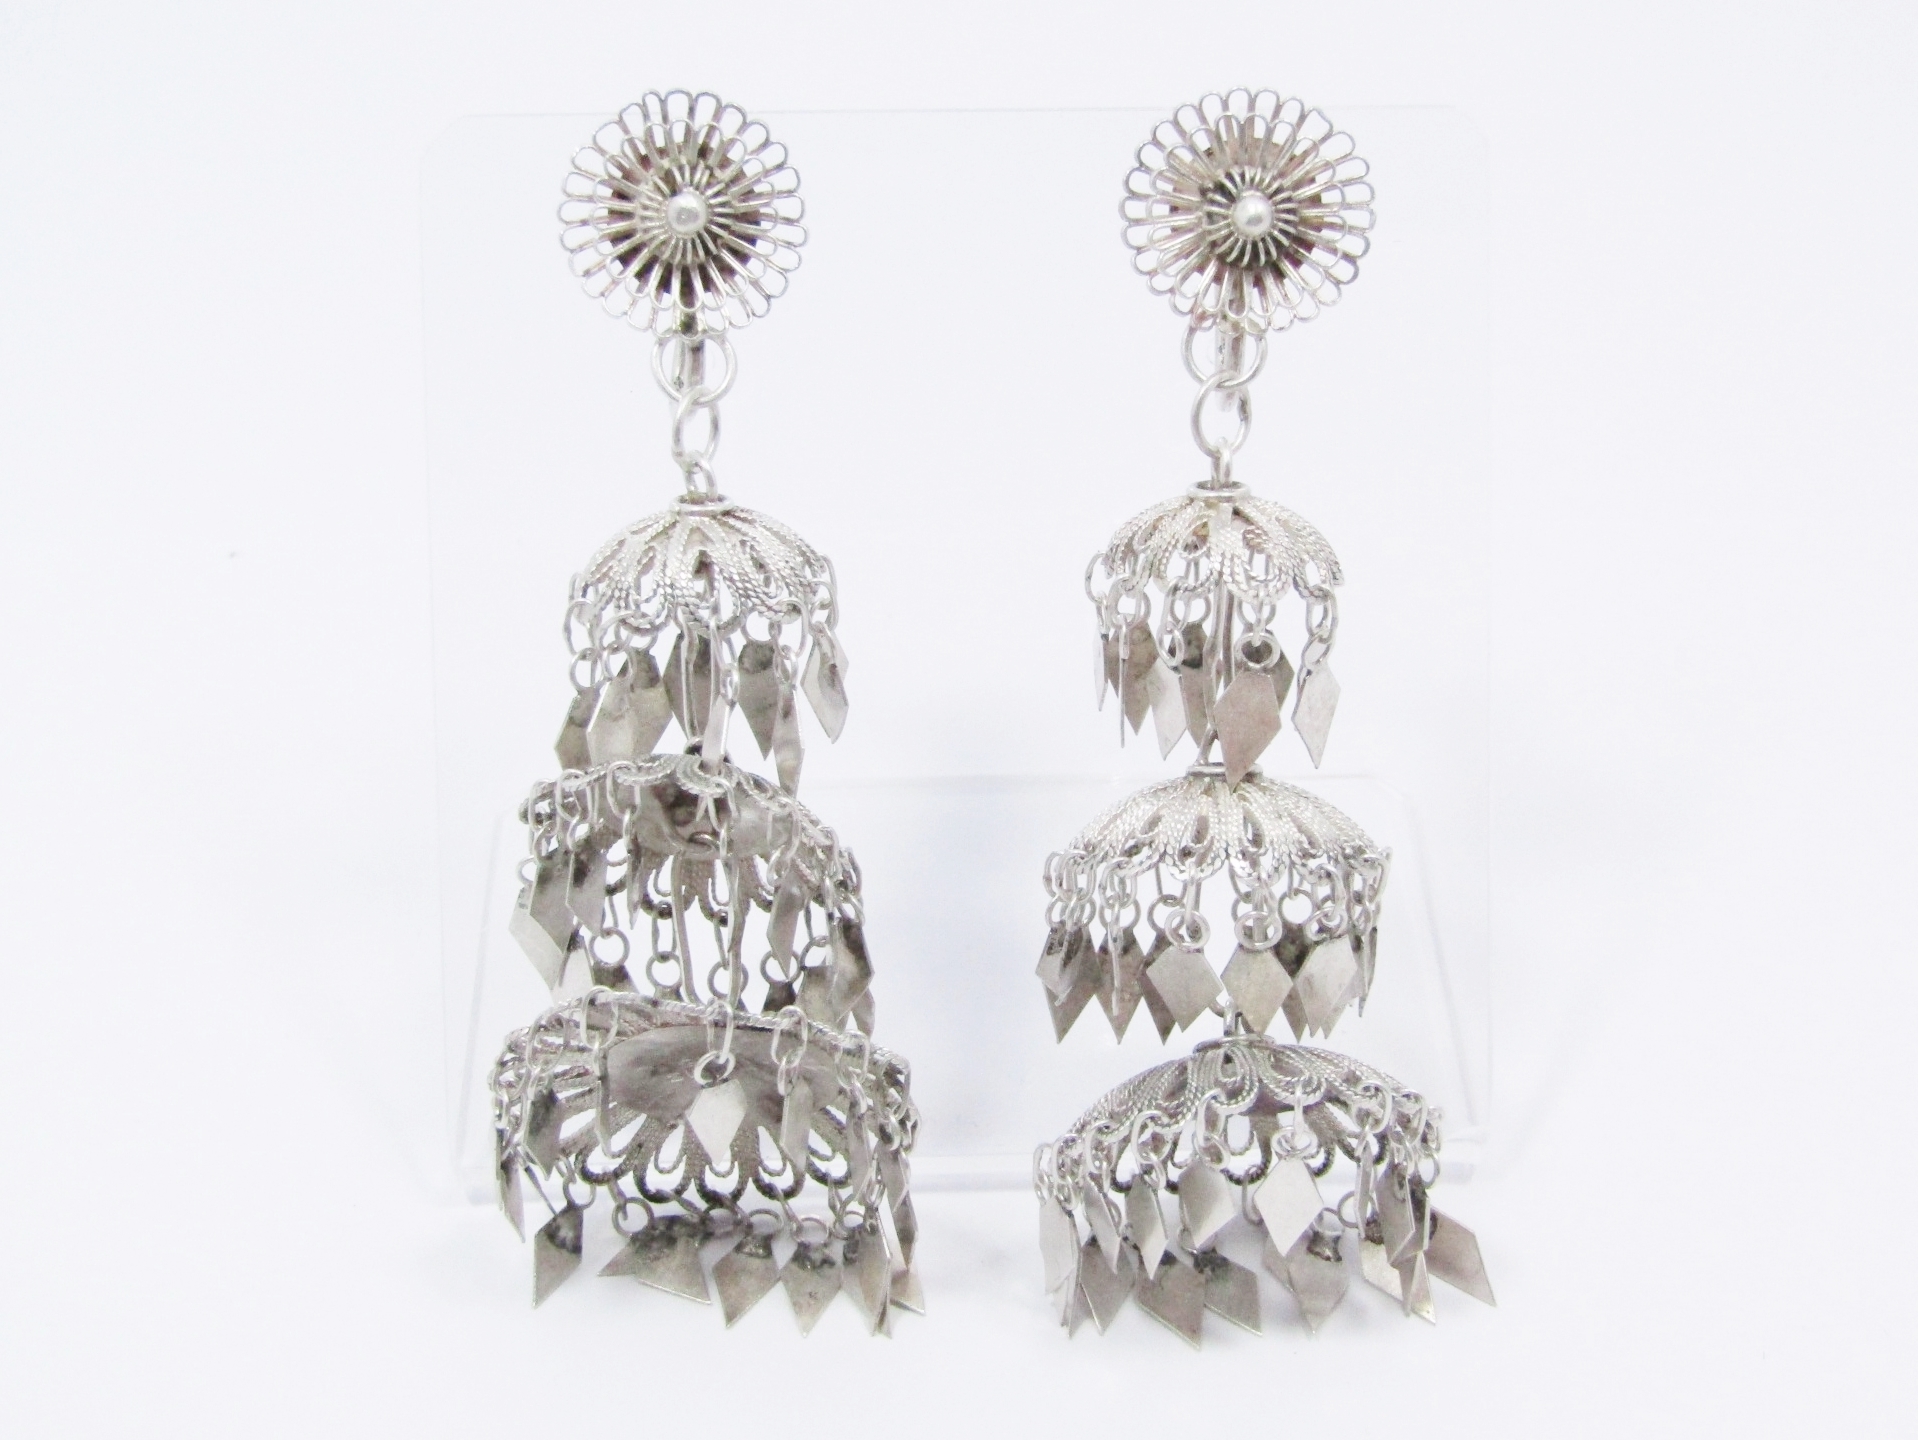 A Gorgeous Pair of Filigree Gypsy Design Chandelier Earrings in Sterling Silver